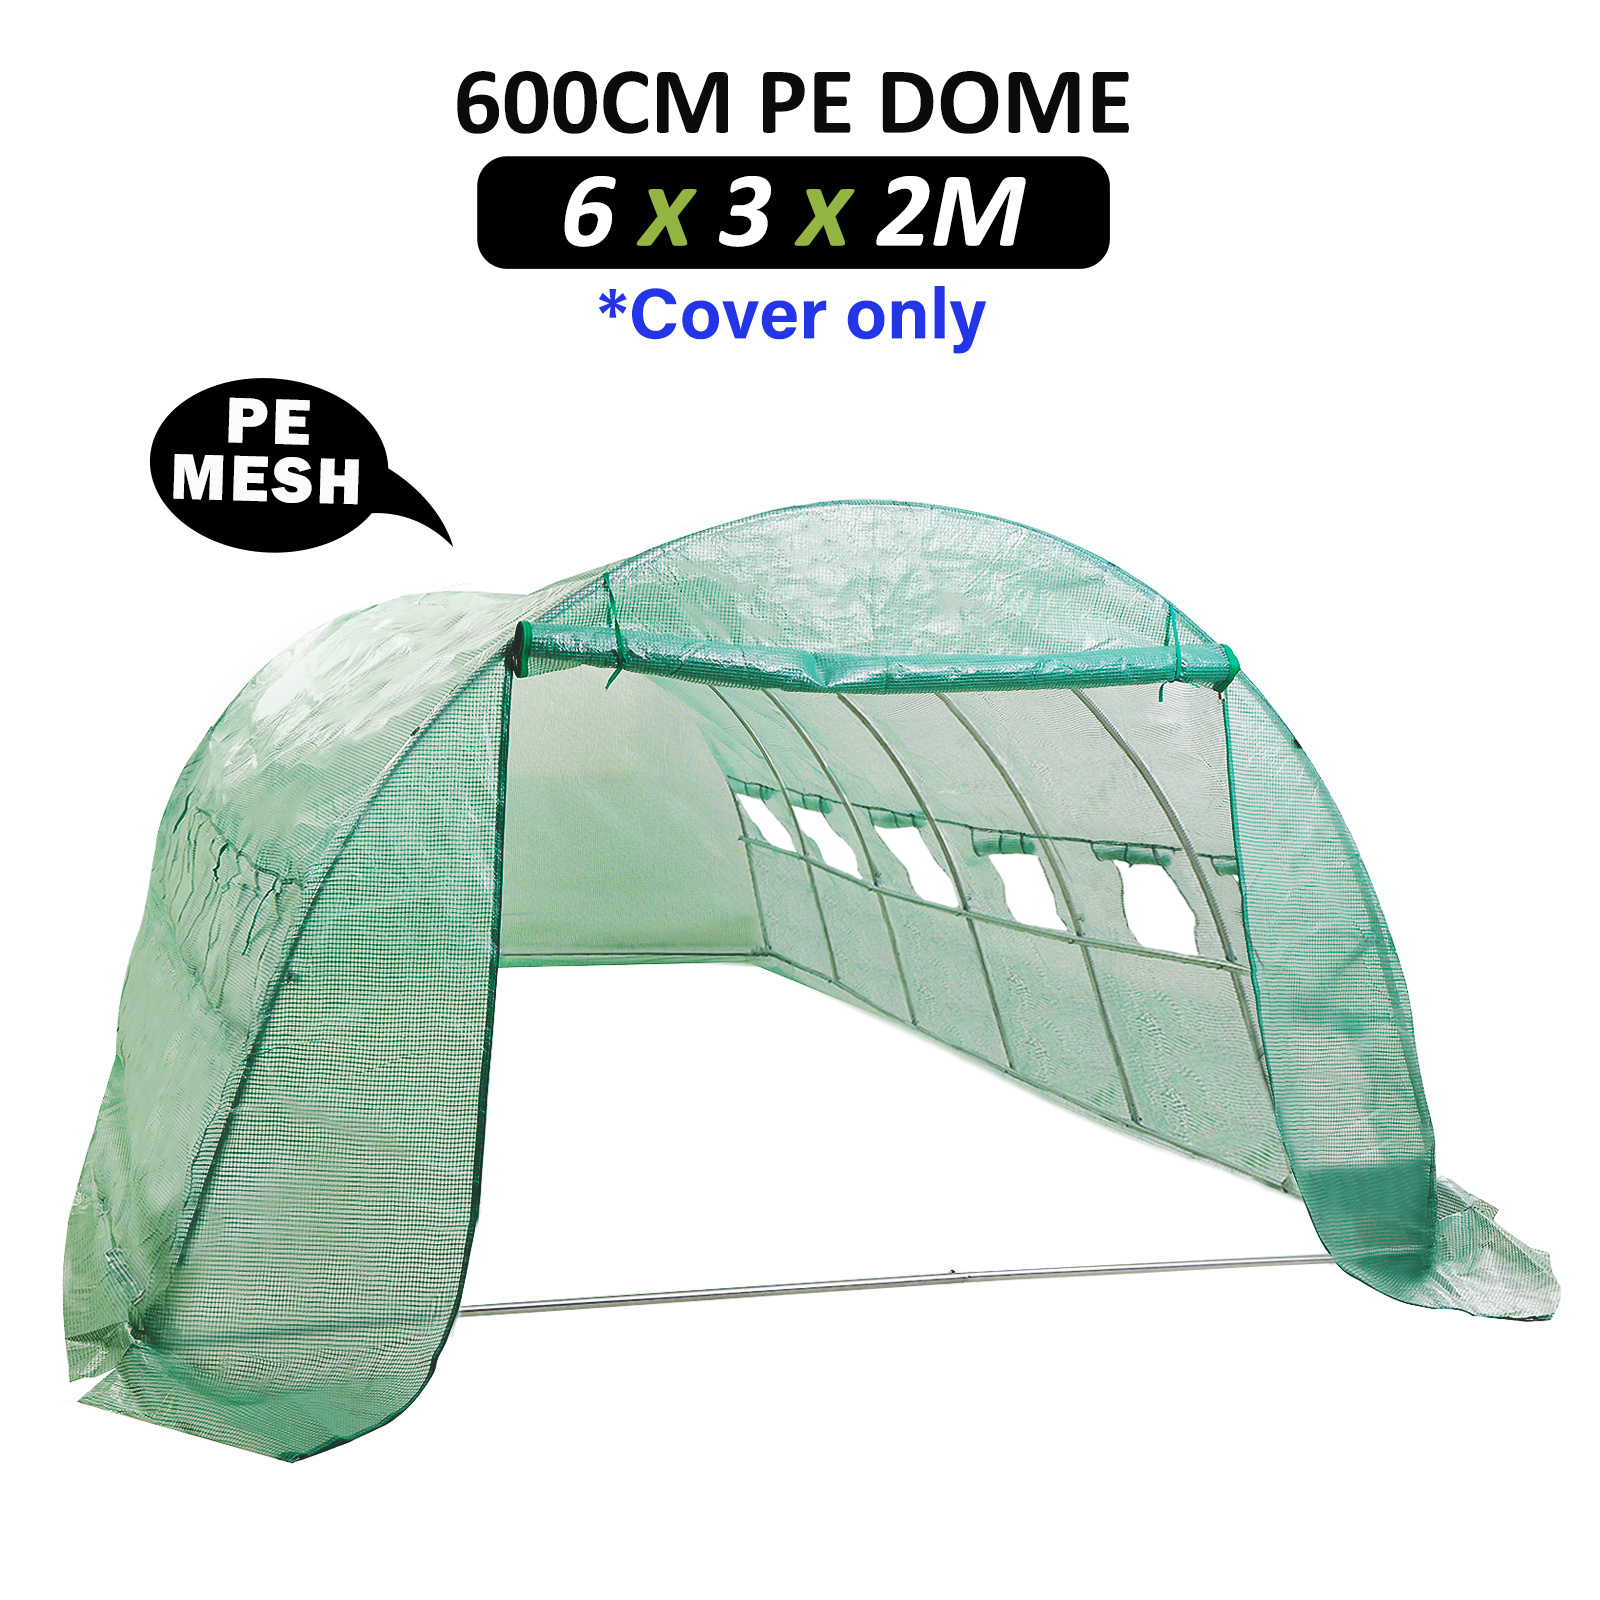 600cm Greenhouse PE Dome Tunnel Cover Only  - GREEN